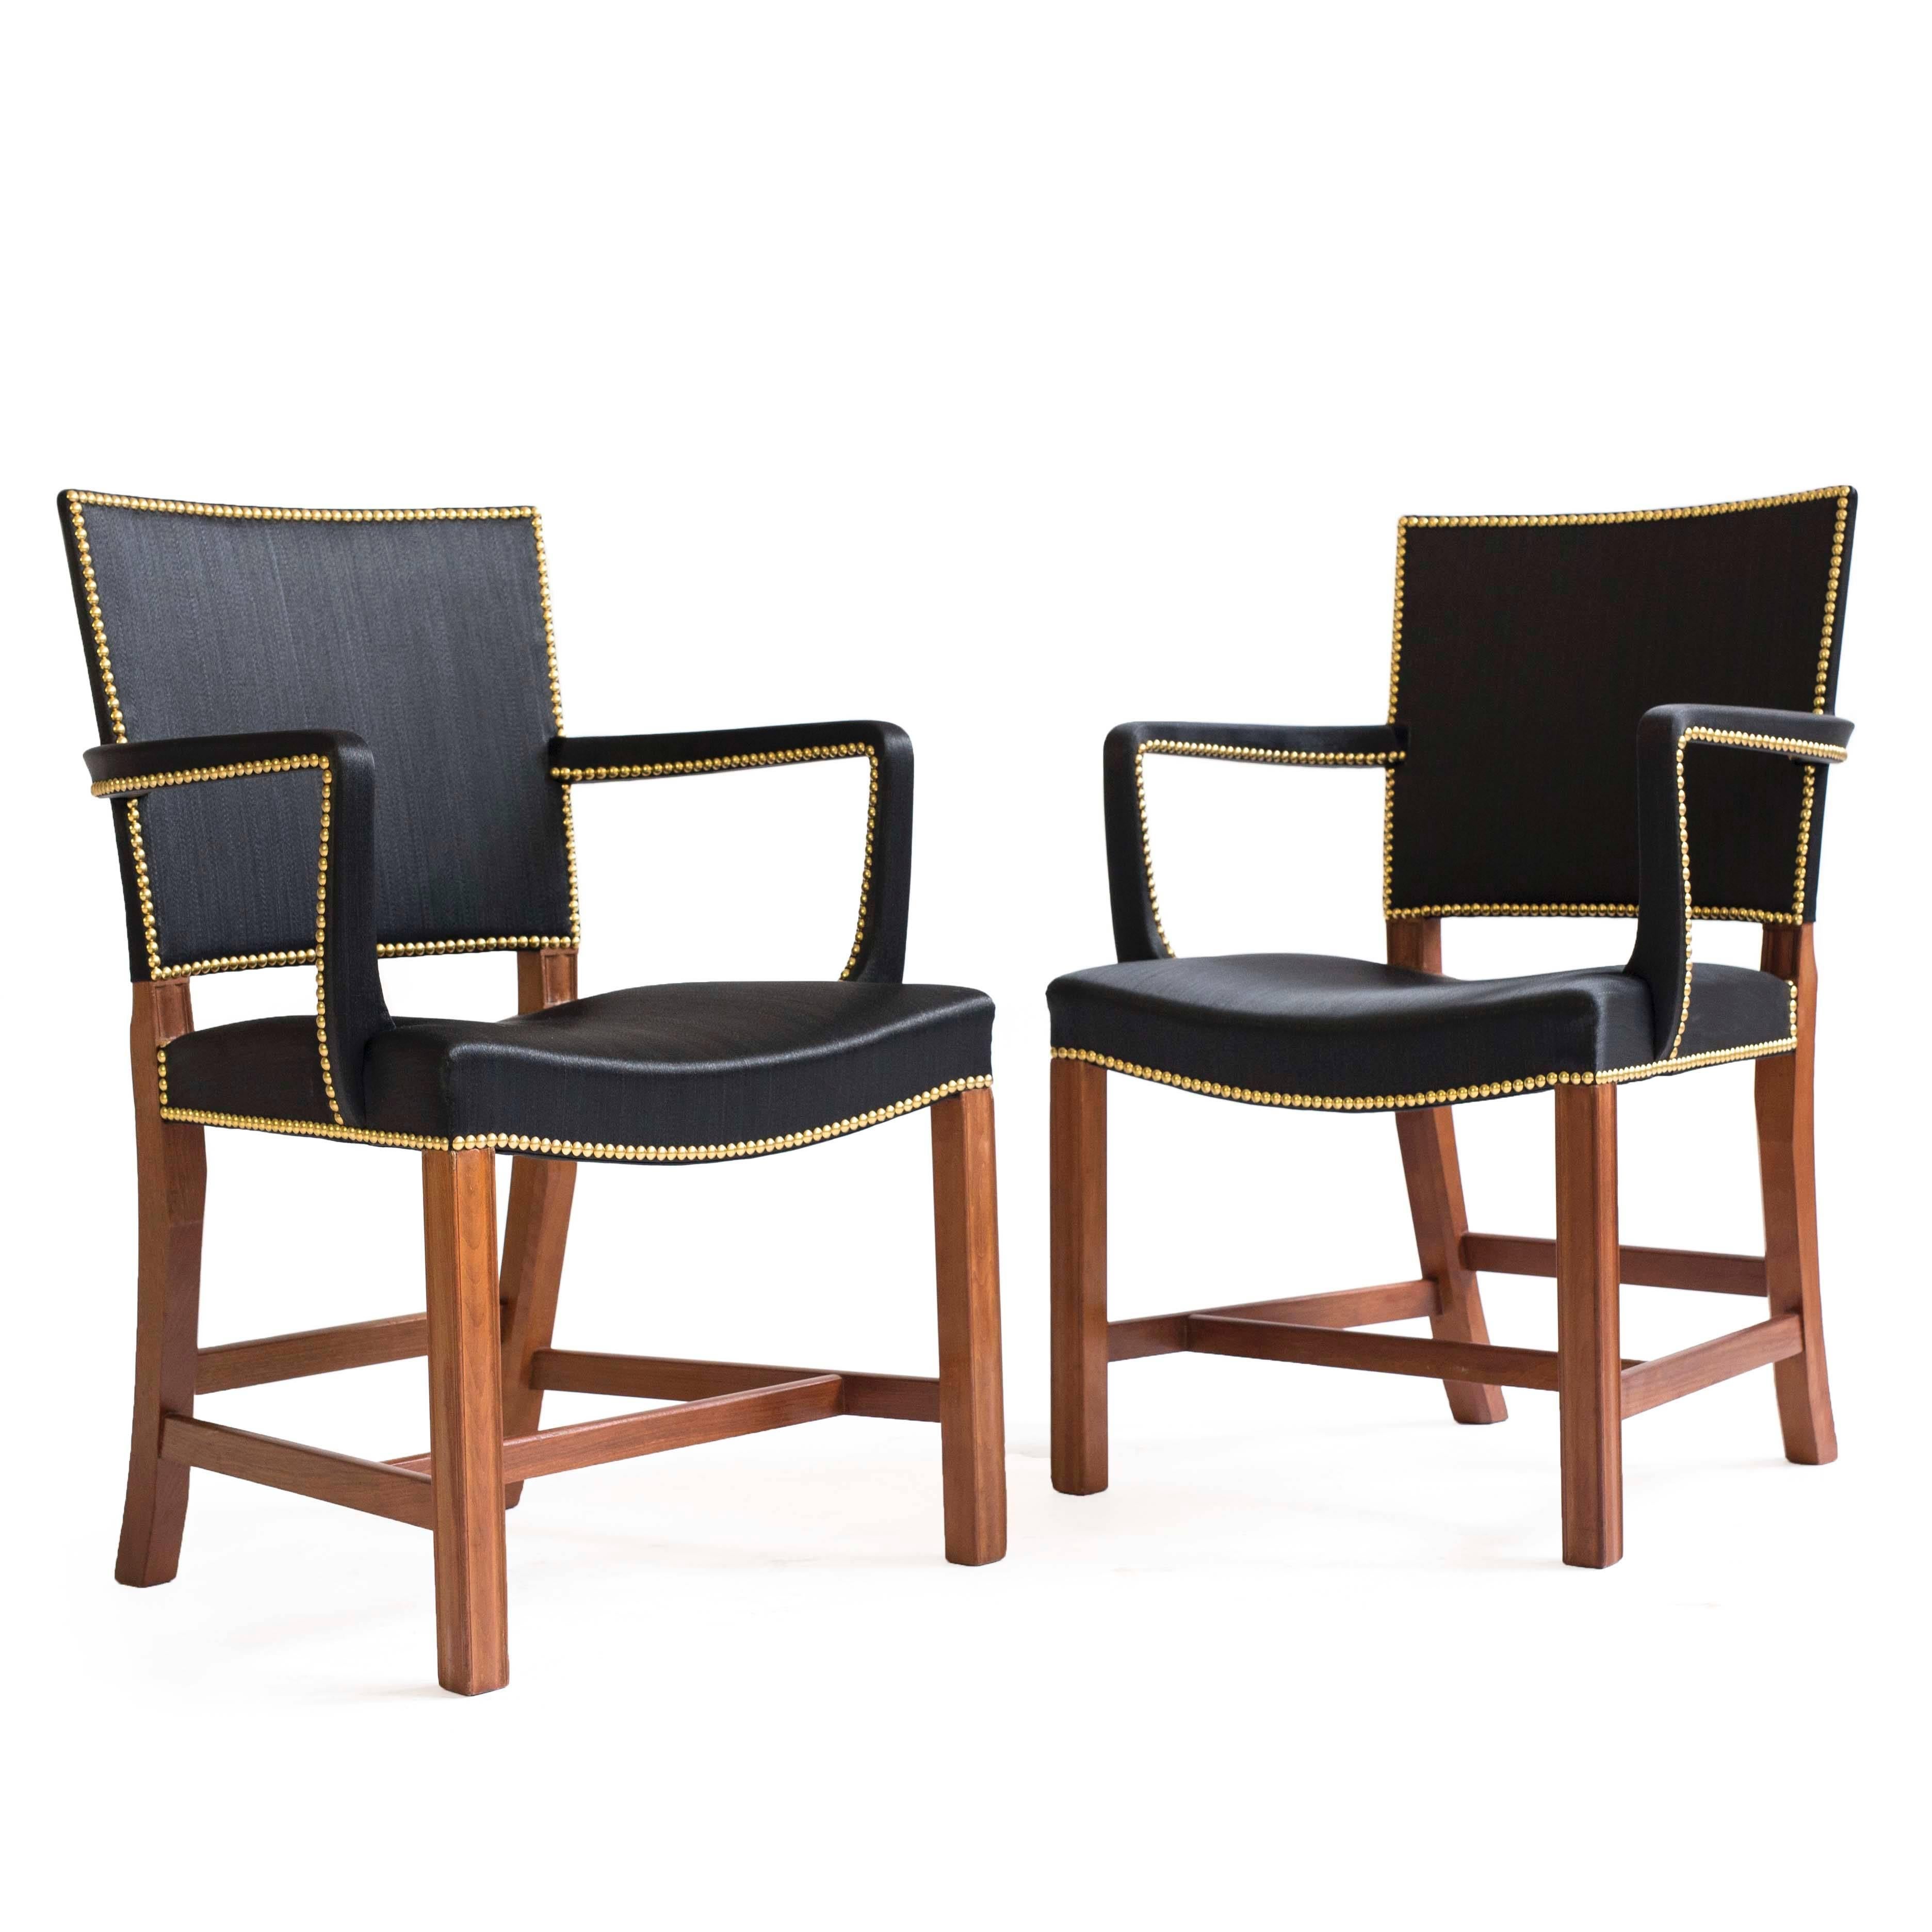 A pair of Kaare Klint 'Red armchairs' with profiled frames of Cuban mahogany, seat back and arms upholstered with black horsehair fitted with brass nails. 

Designed 1927, executed by cabinetmaker Rud. Rasmussen app. 1938-1940 model 3758A.